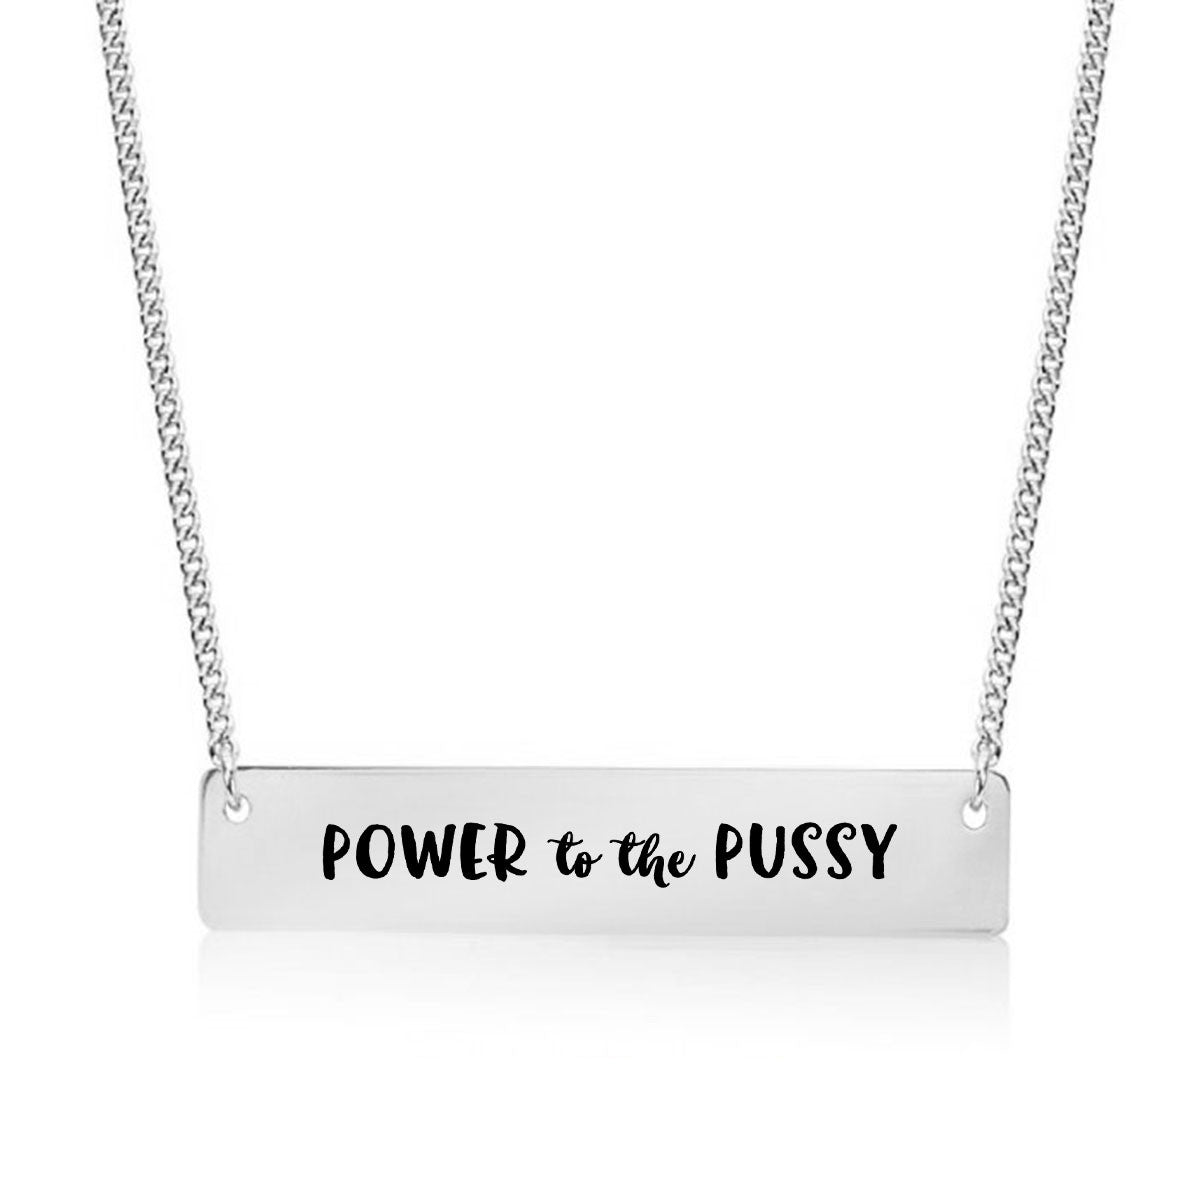 Power to the Pussy Gold / Silver Bar Necklace - pipercleo.com